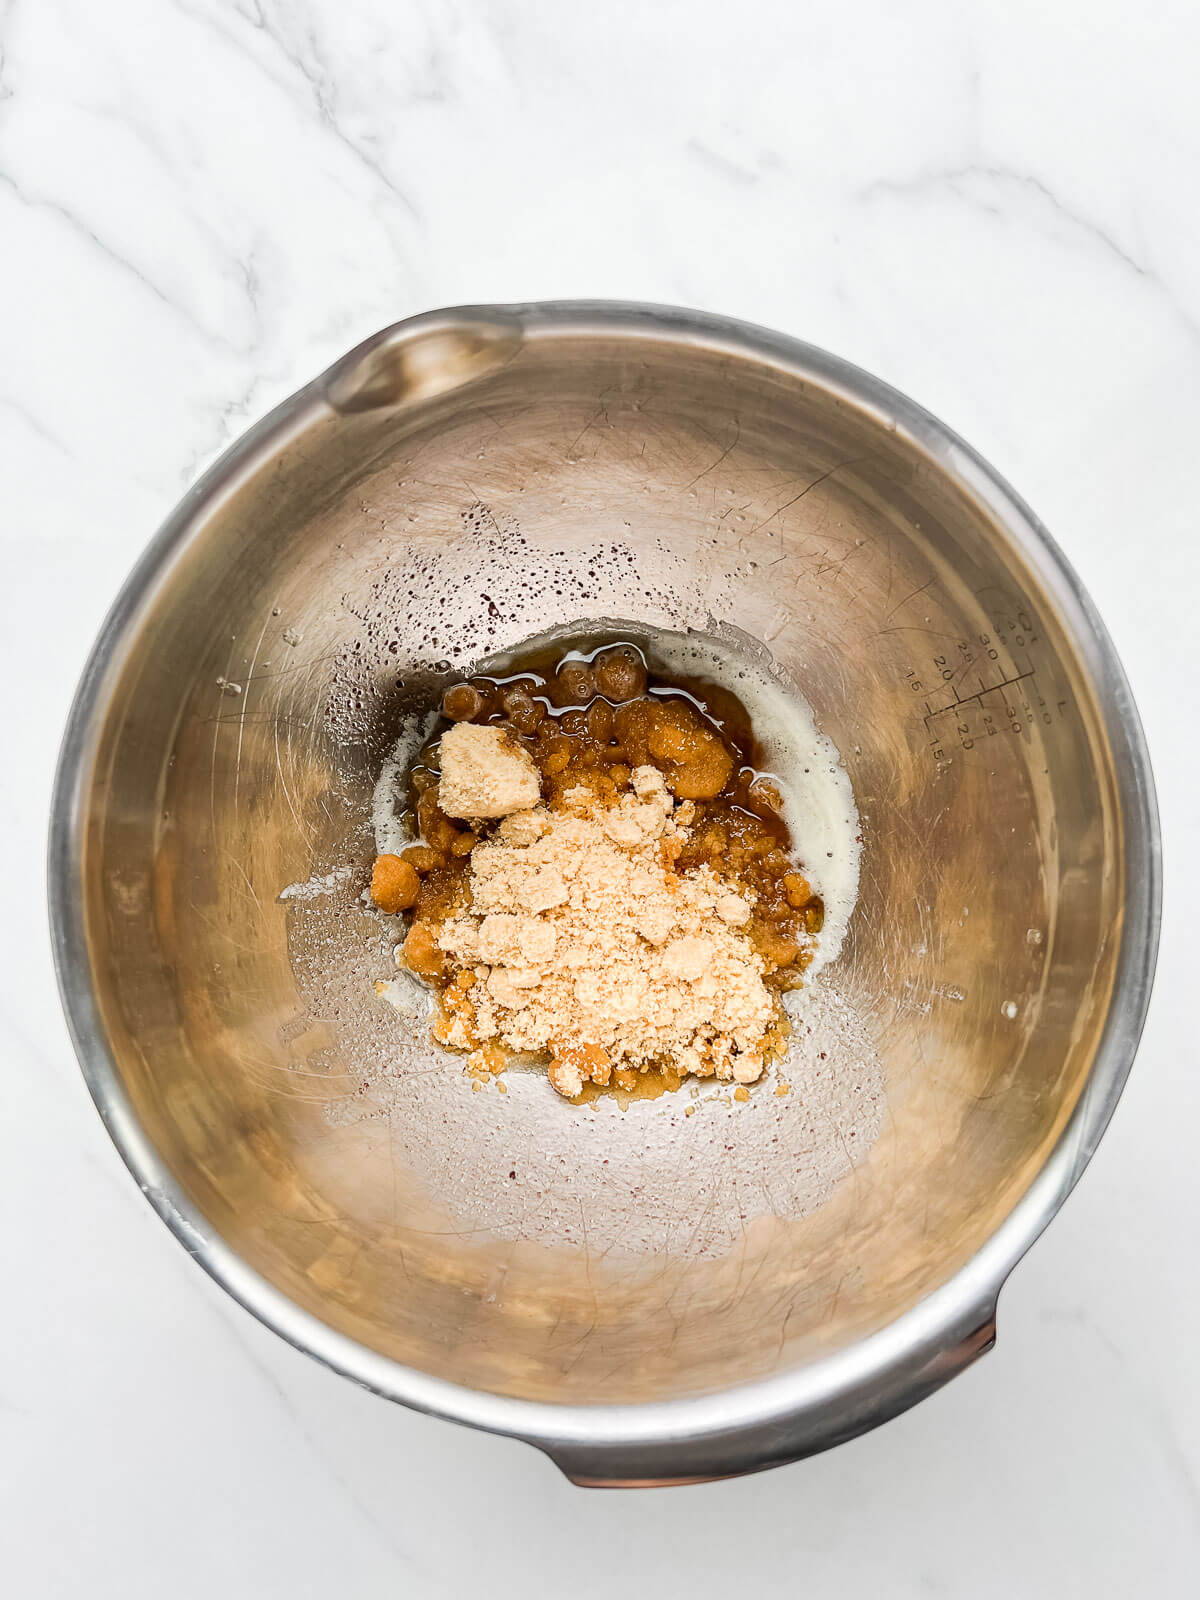 Brown butter and brown sugar in a stainless steel bowl.